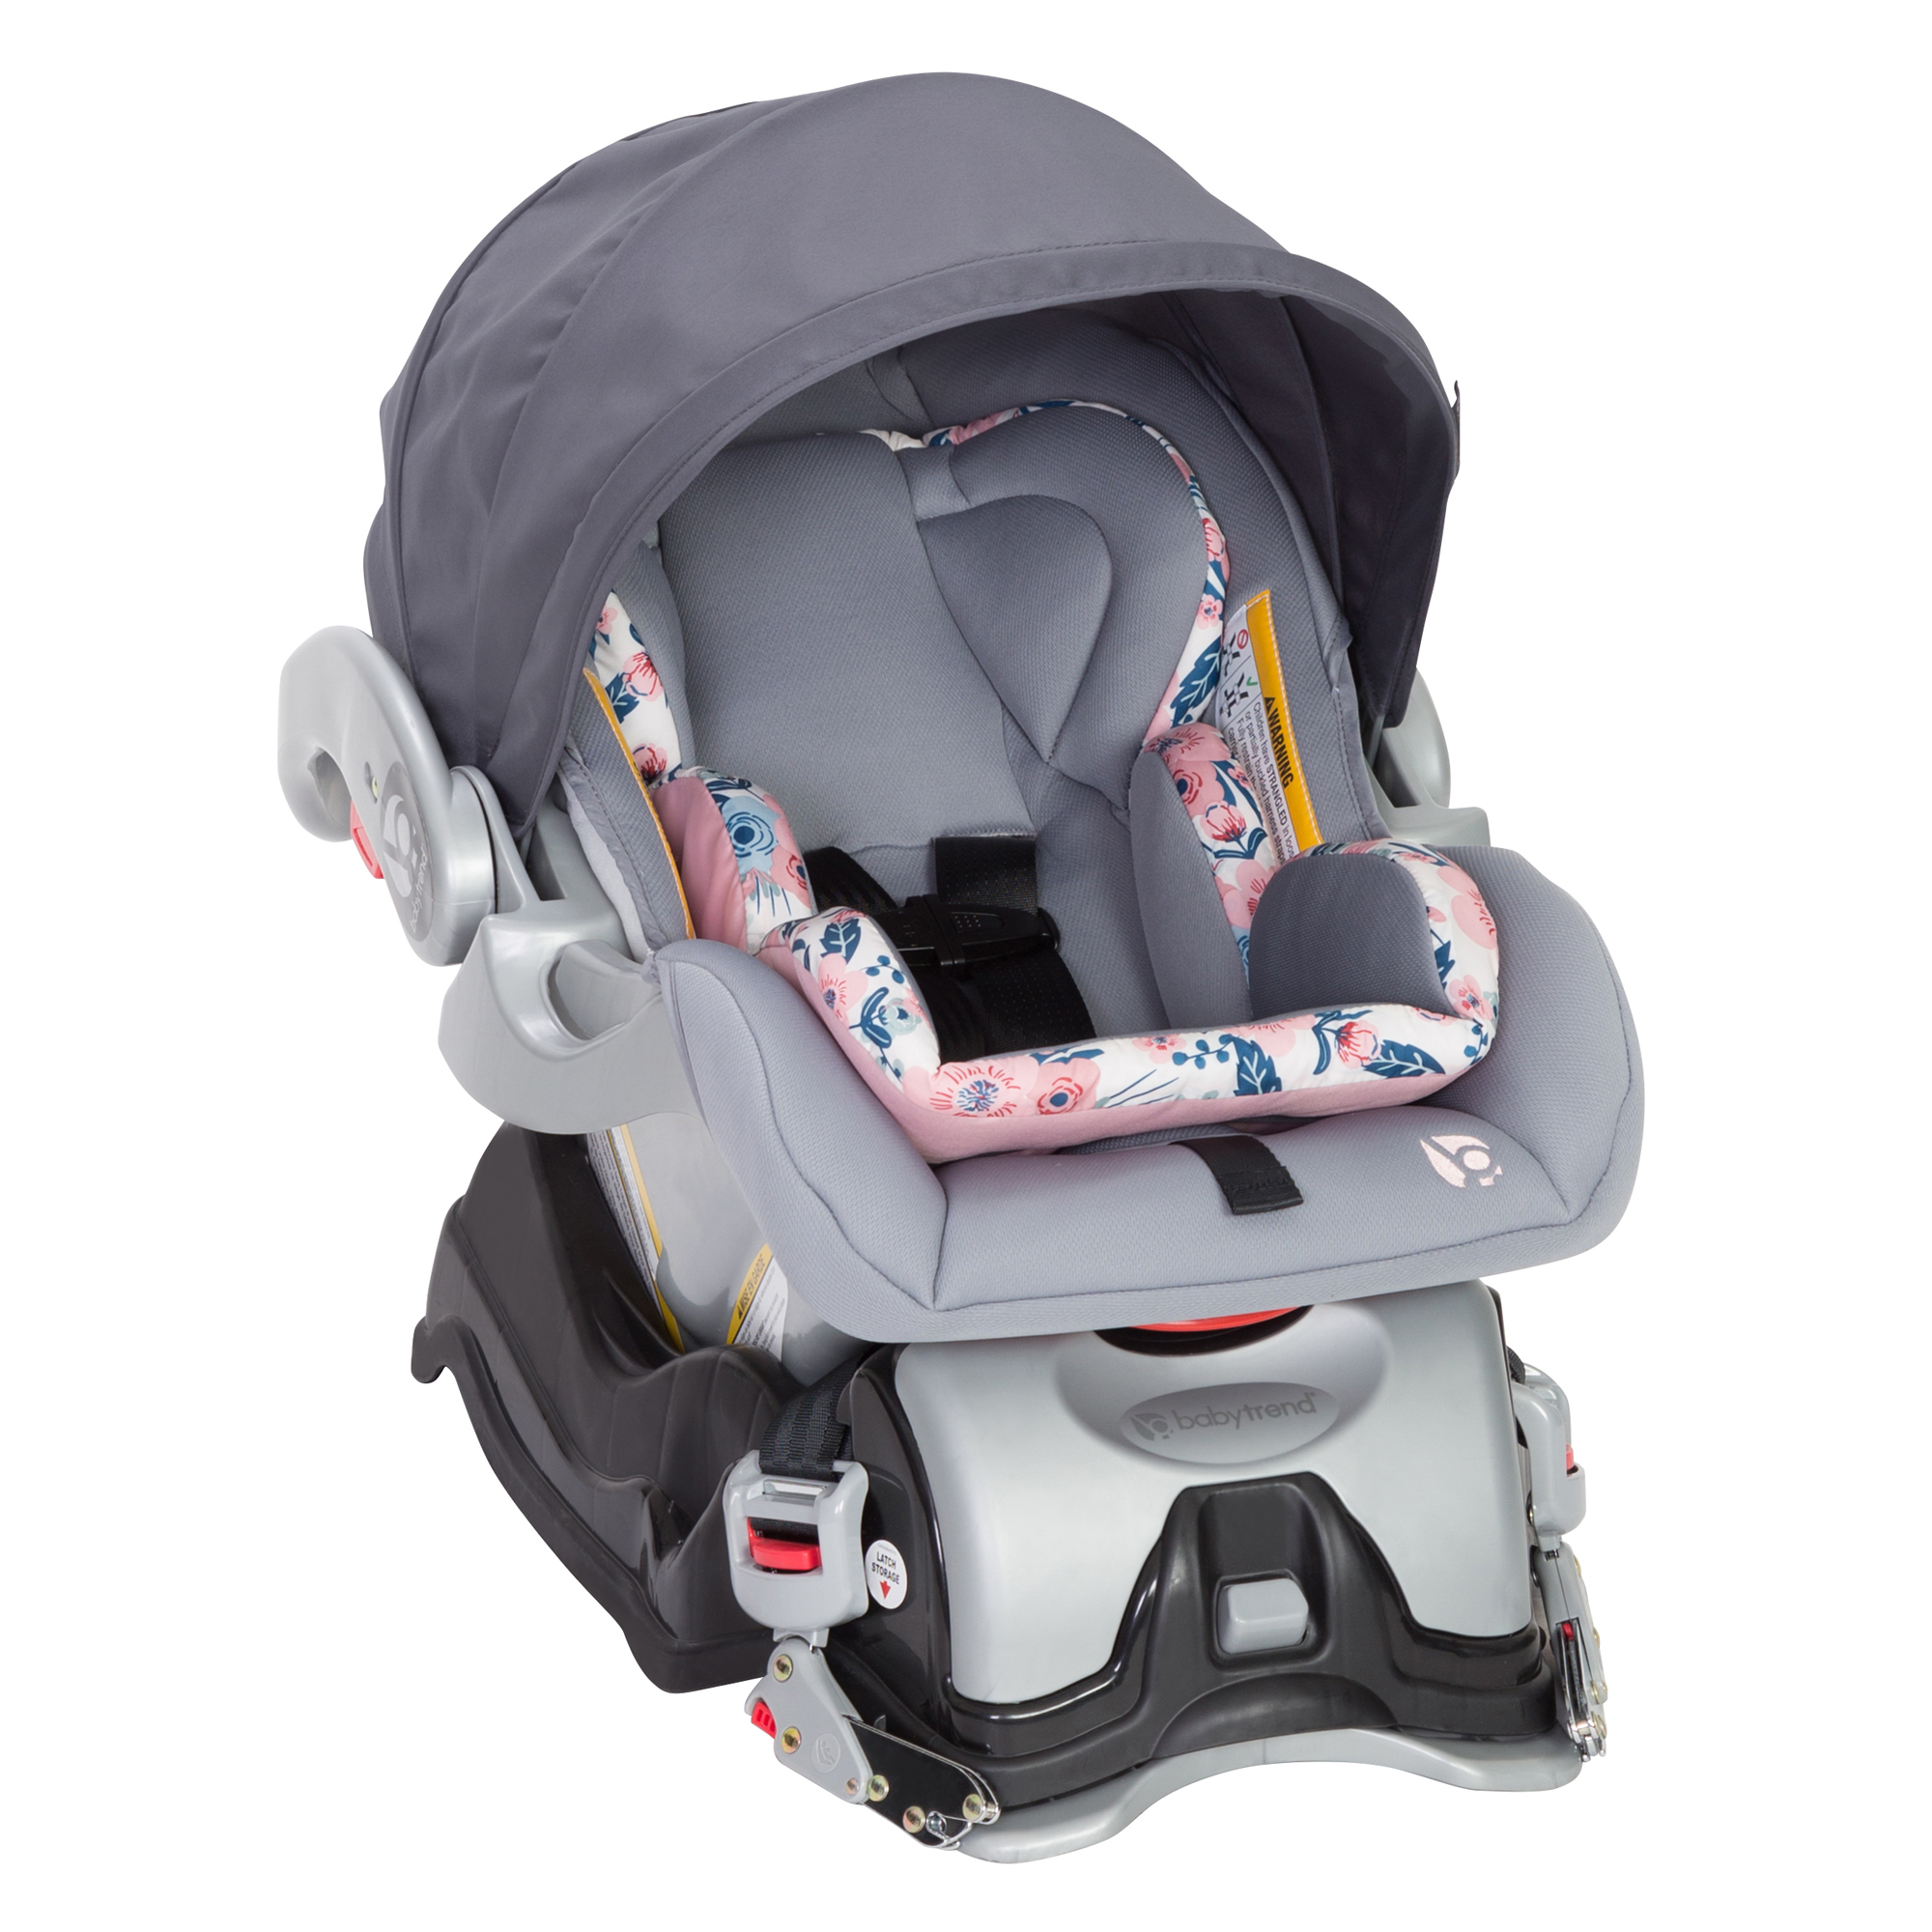 Baby Trend Skyview Plus Travel System - Bluebell - image 4 of 7